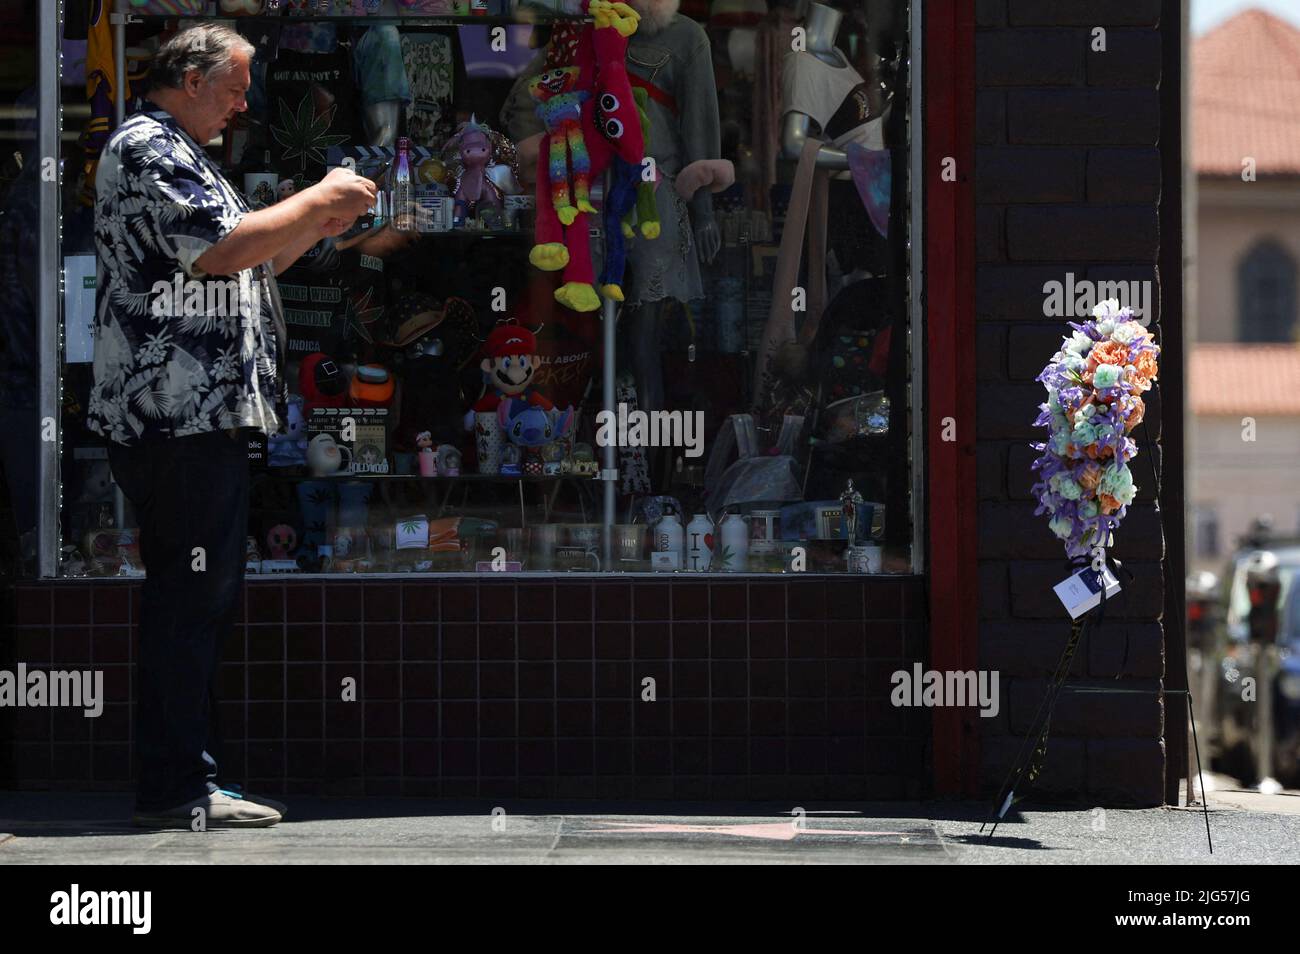 A man takes pictures of the late actor James Caan's star on the Hollywood Walk of Fame, Los Angeles, California, U.S., July 7, 2022 REUTERS/Mario Anzuoni Stock Photo